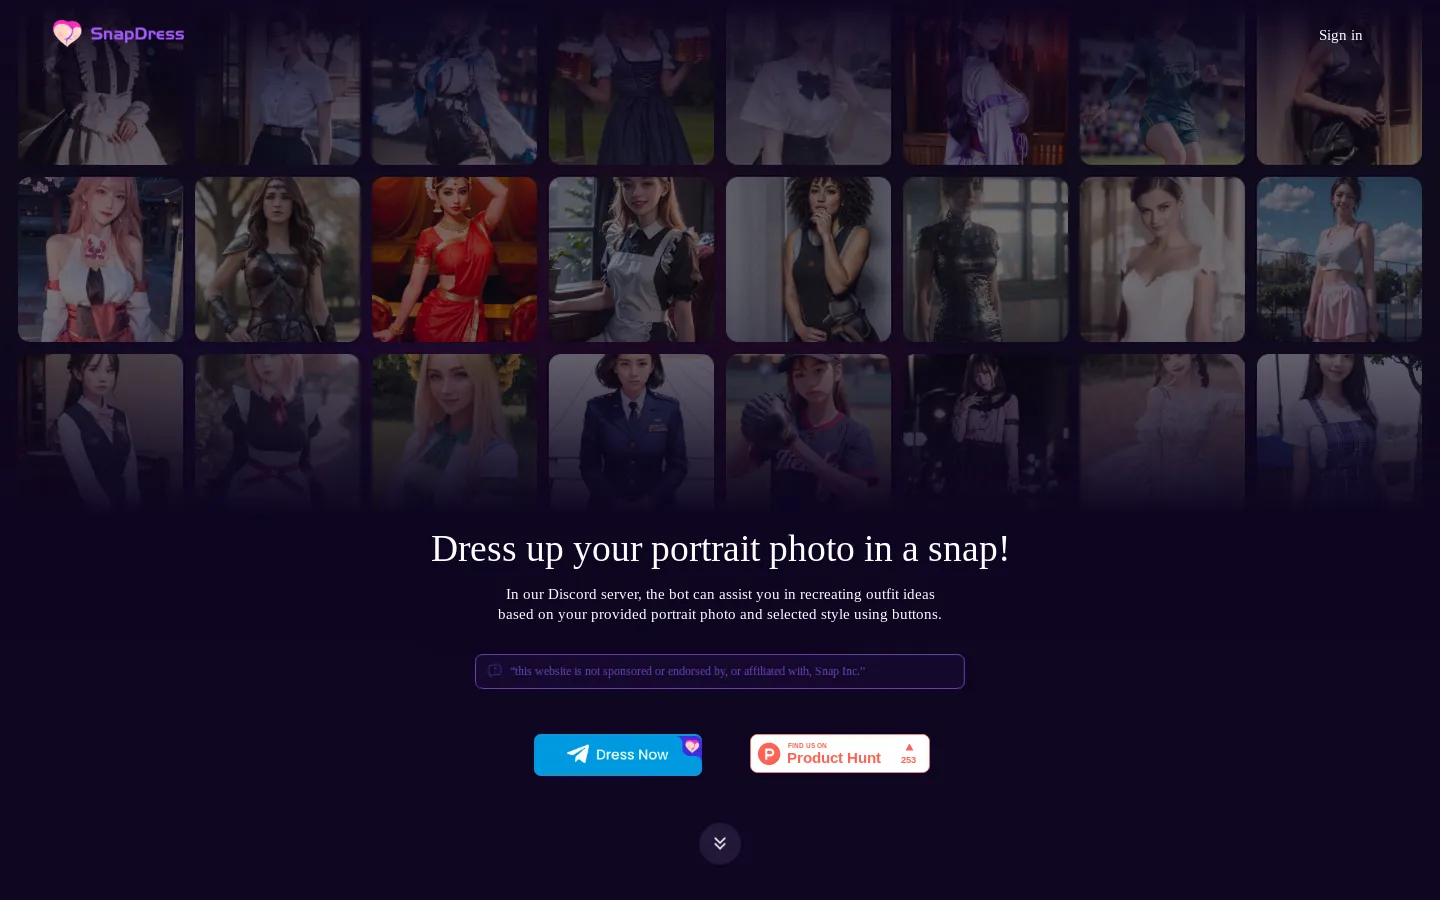 SnapDress: Dress up in a snap!